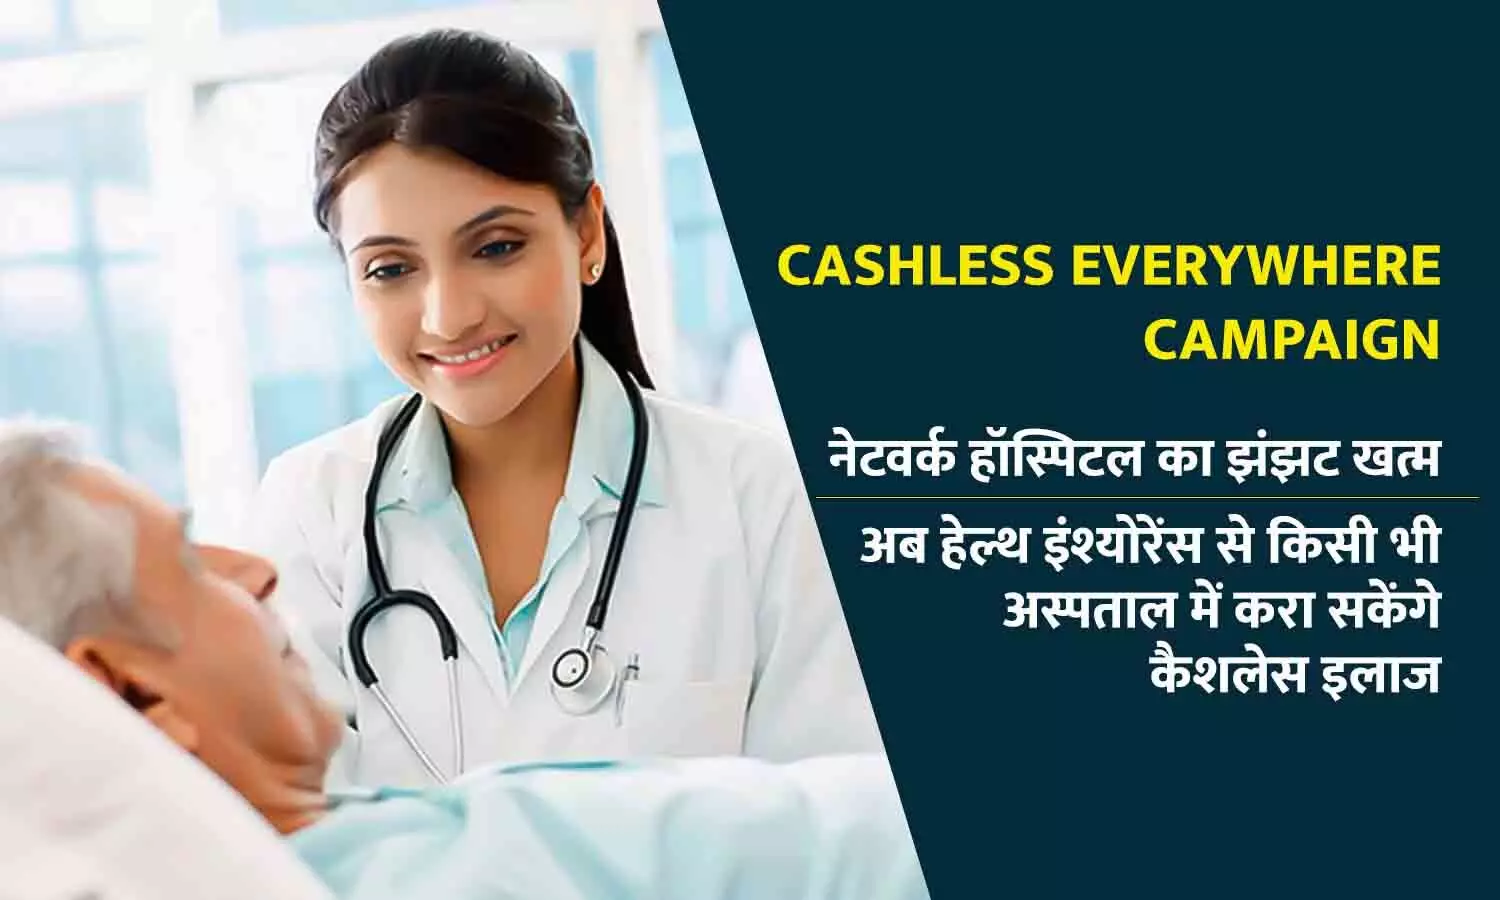 CASHLESS EVERYWHERE CAMPAIGN